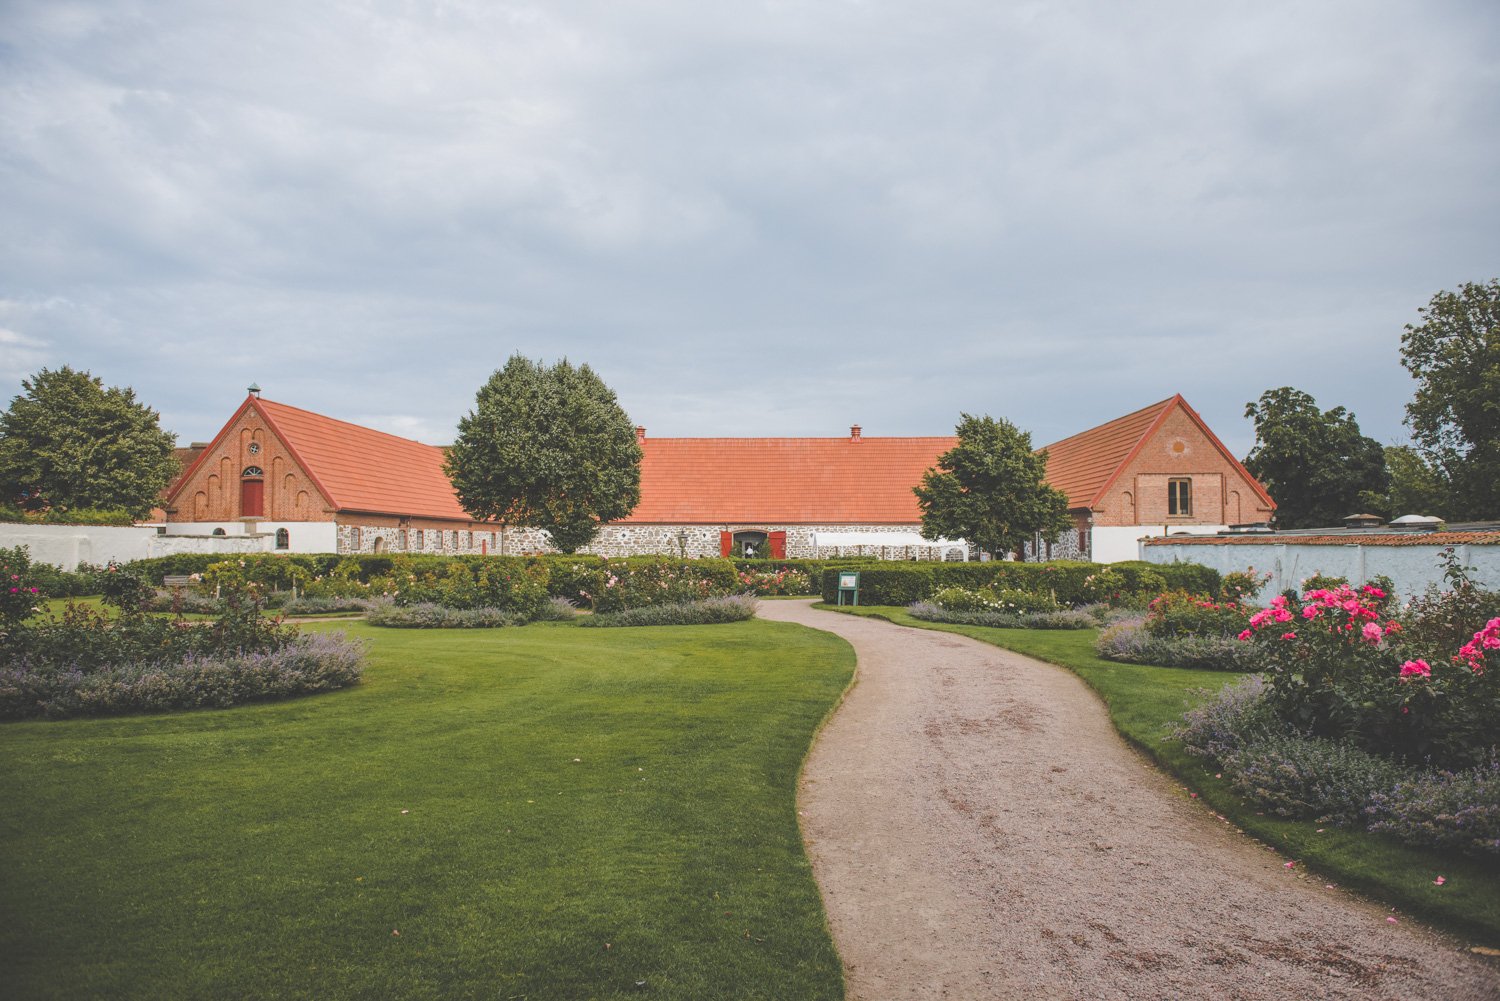  Dinner &amp; party are held in the farm buildings opposite the castle 